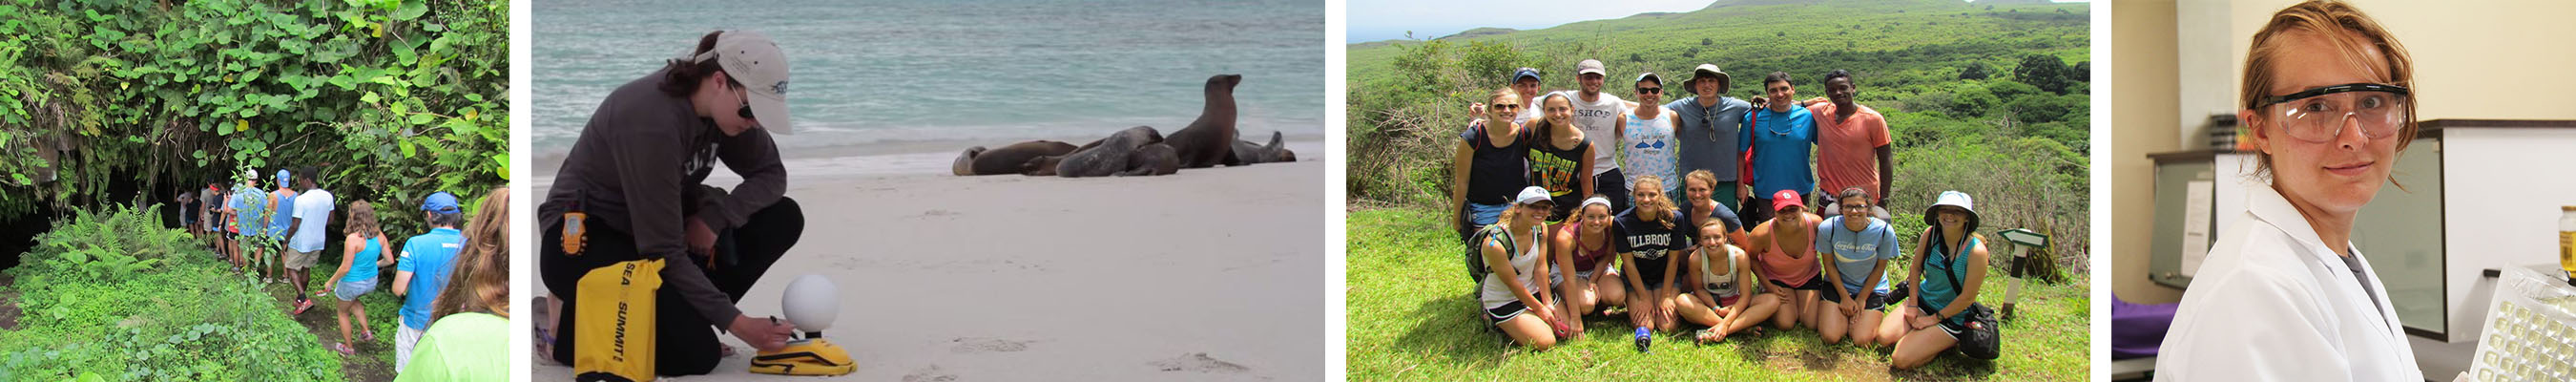 Collage of four images, left to right: A group of study abroad students enters the woods; a student gathers data on the beach near a group of sea lions; a large group of study abroad students cluster together; a researcher wearing lab equipment stands inside a lab.